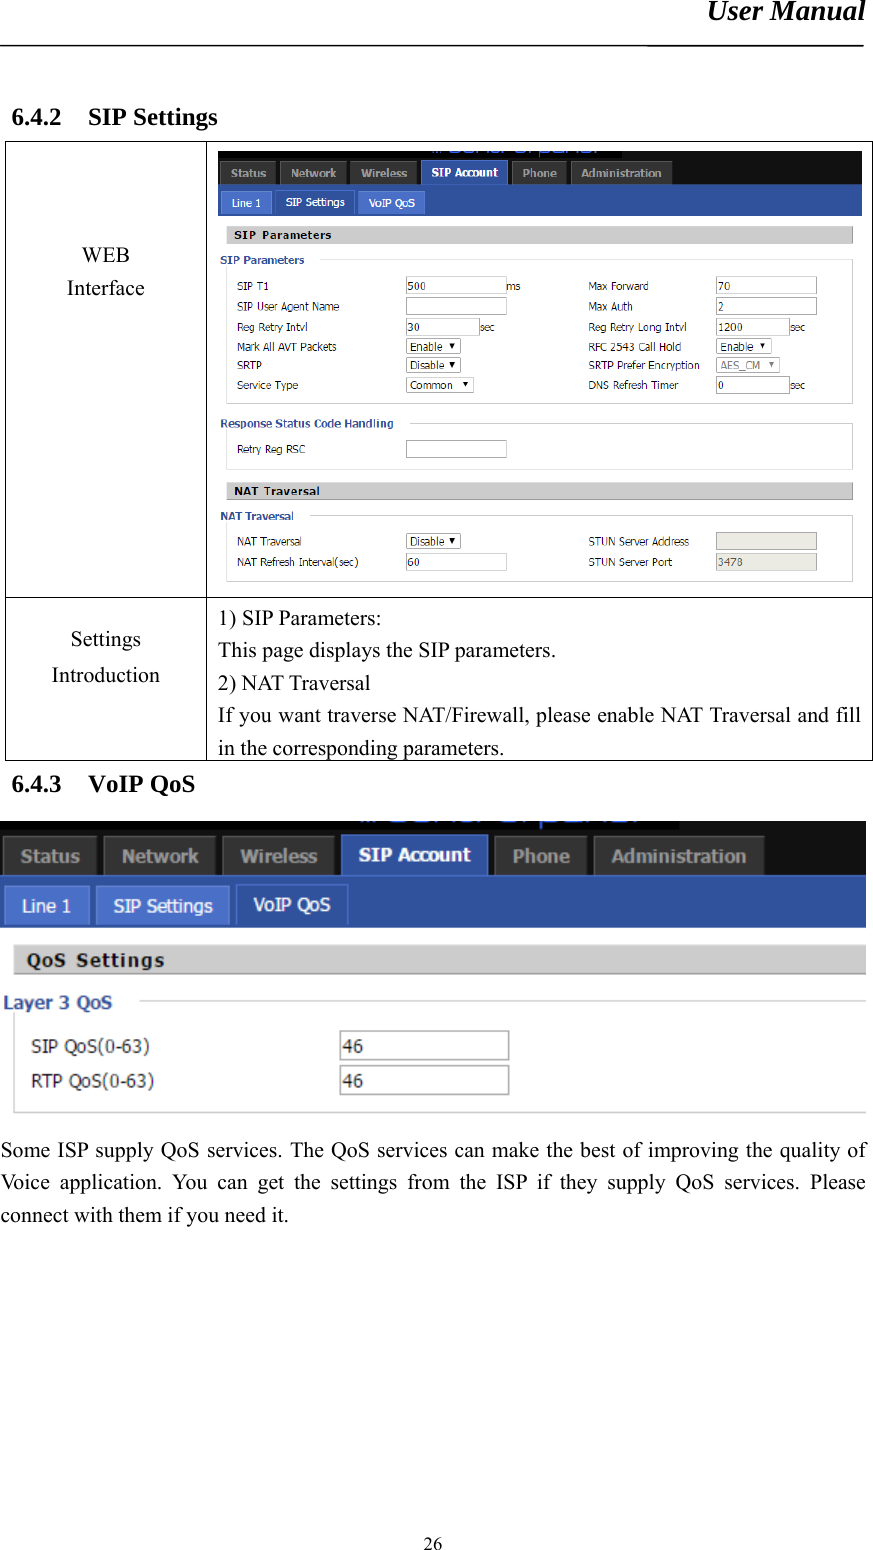 User Manual       266.4.2 SIP Settings    WEB Interface Settings Introduction 1) SIP Parameters: This page displays the SIP parameters. 2) NAT Traversal If you want traverse NAT/Firewall, please enable NAT Traversal and fill in the corresponding parameters. 6.4.3 VoIP QoS  Some ISP supply QoS services. The QoS services can make the best of improving the quality of Voice application. You can get the settings from the ISP if they supply QoS services. Please connect with them if you need it. 